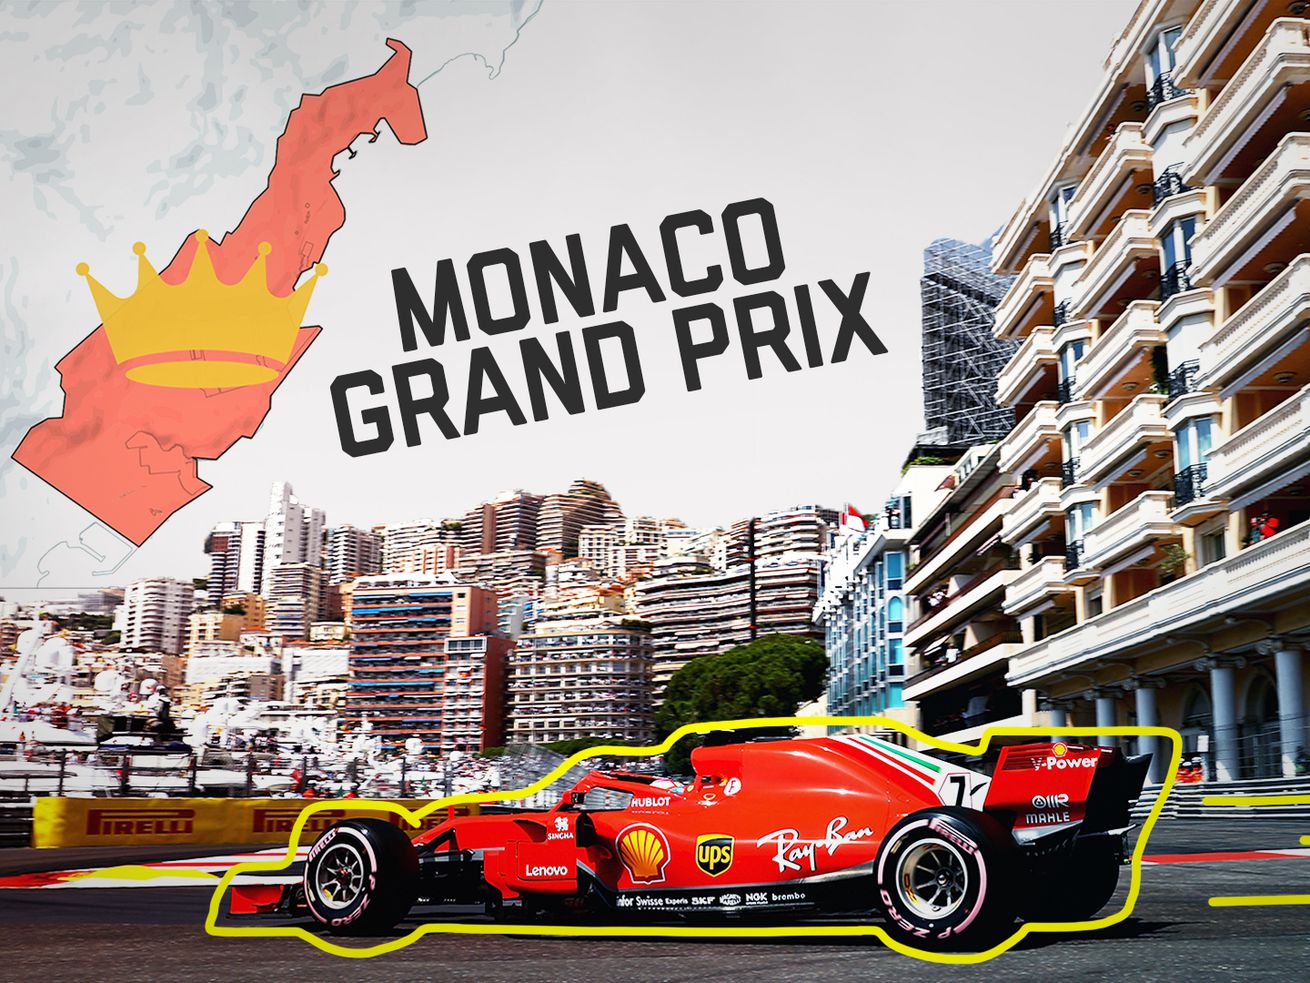 Why the world’s most famous car race is in Monaco